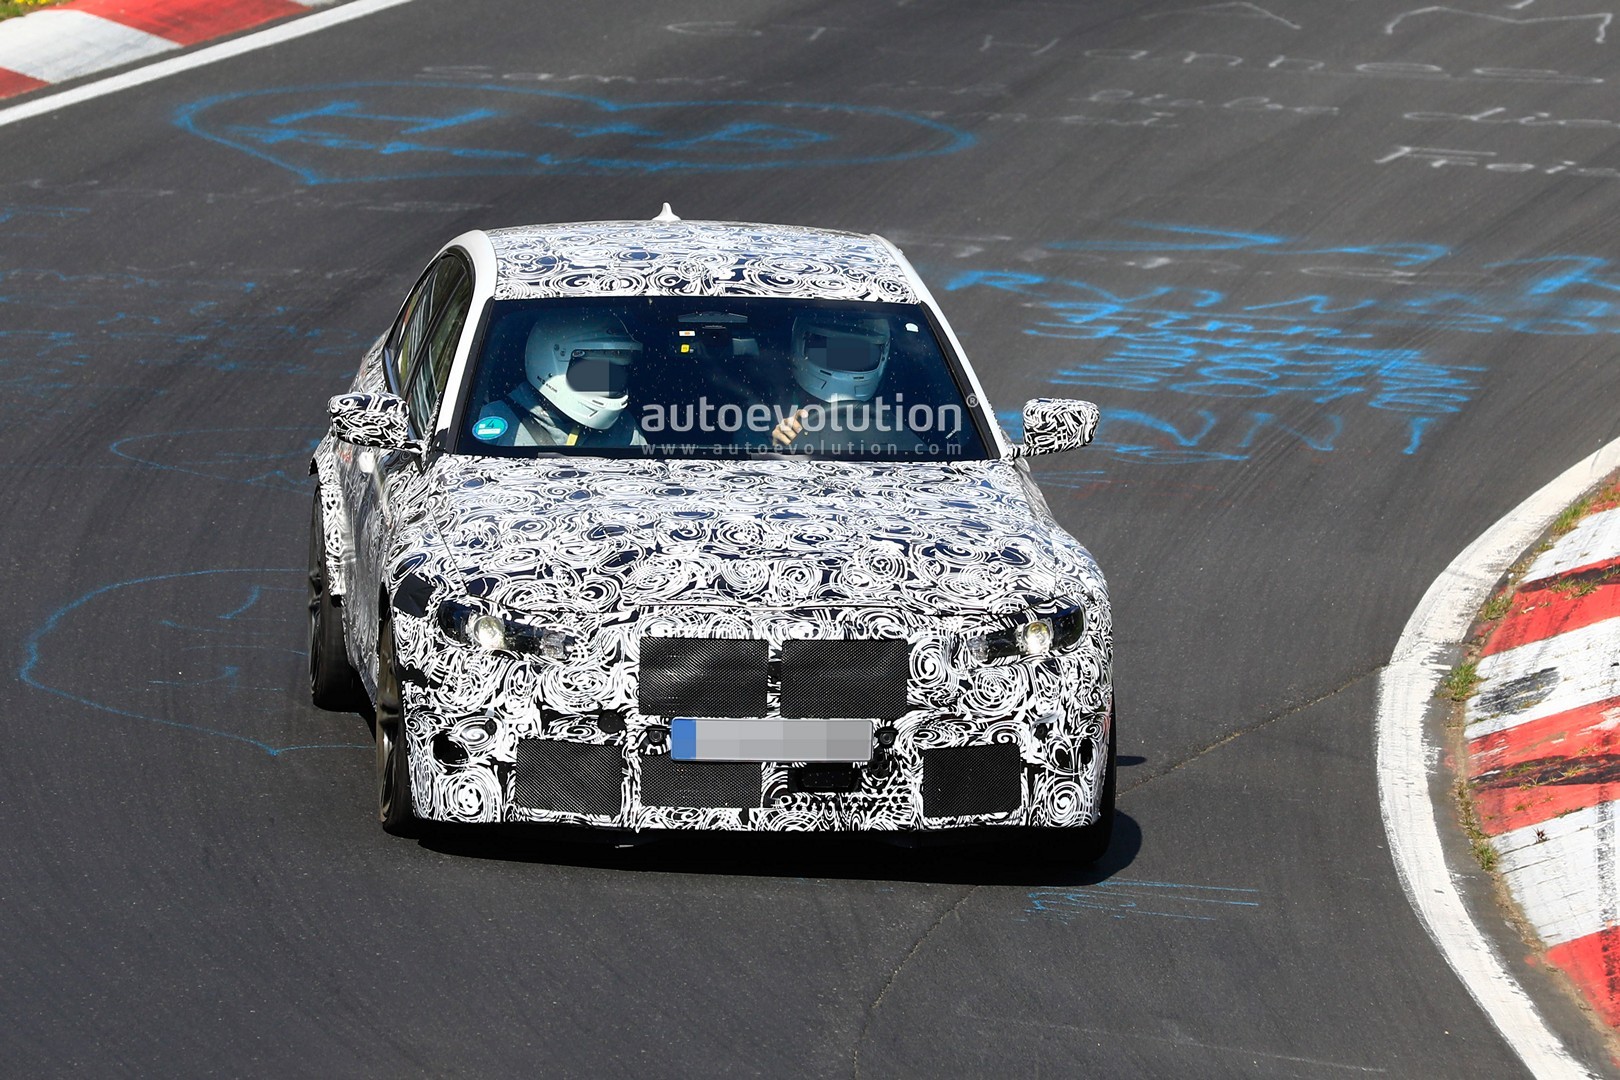 2021 BMW M4 (G82) Confirmed With Oversized Kidney Grille ...